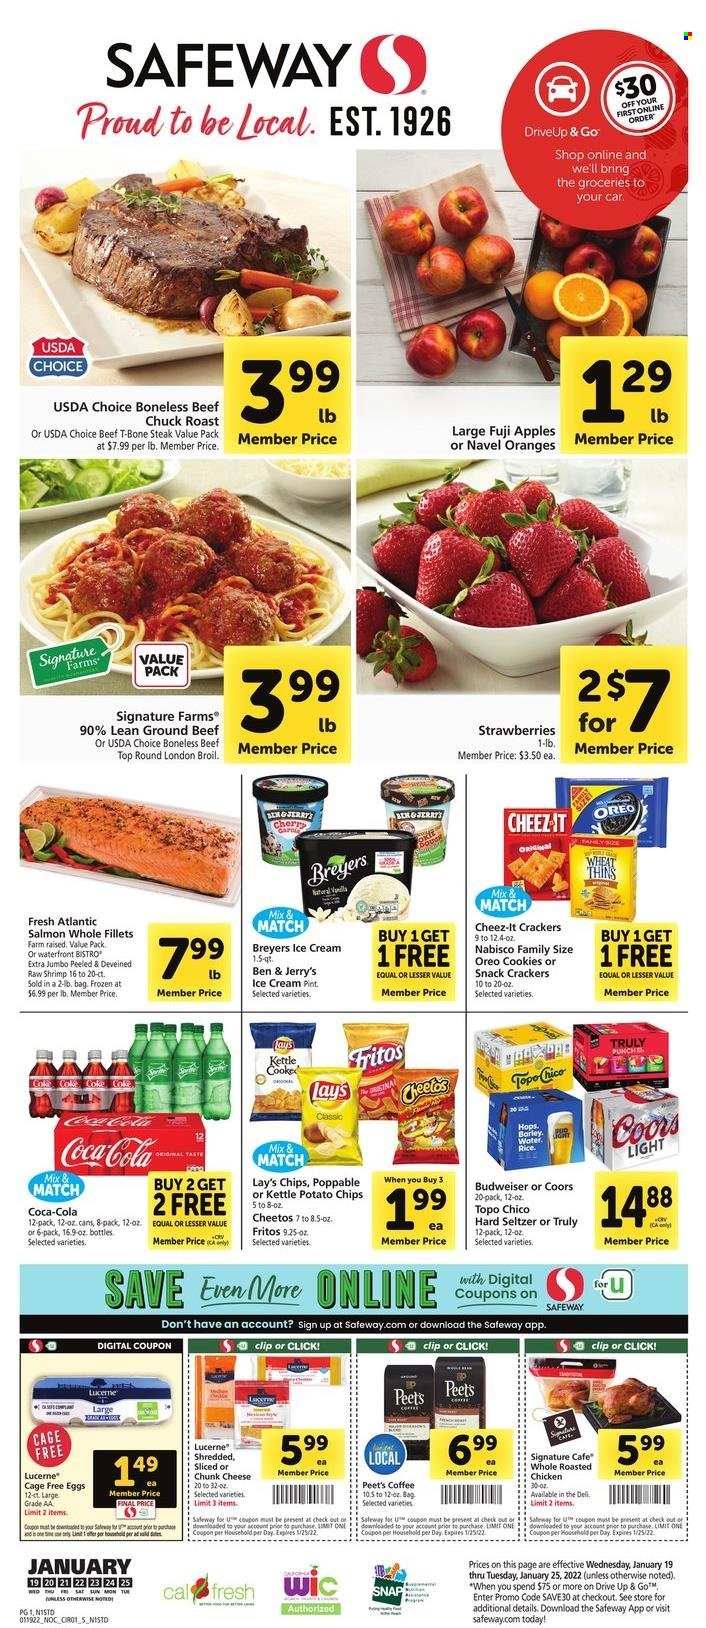 thumbnail - Safeway Flyer - 01/19/2022 - 01/25/2022 - Sales products - apples, strawberries, oranges, Fuji apple, beef meat, ground beef, t-bone steak, steak, chuck roast, salmon, shrimps, chicken roast, cheese, chunk cheese, Oreo, eggs, cage free eggs, ice cream, Ben & Jerry's, cookies, snack, crackers, Fritos, potato chips, Cheetos, Lay’s, Thins, Cheez-It, Coca-Cola, coffee, Hard Seltzer, TRULY, beer, Budweiser, Coors, navel oranges. Page 1.